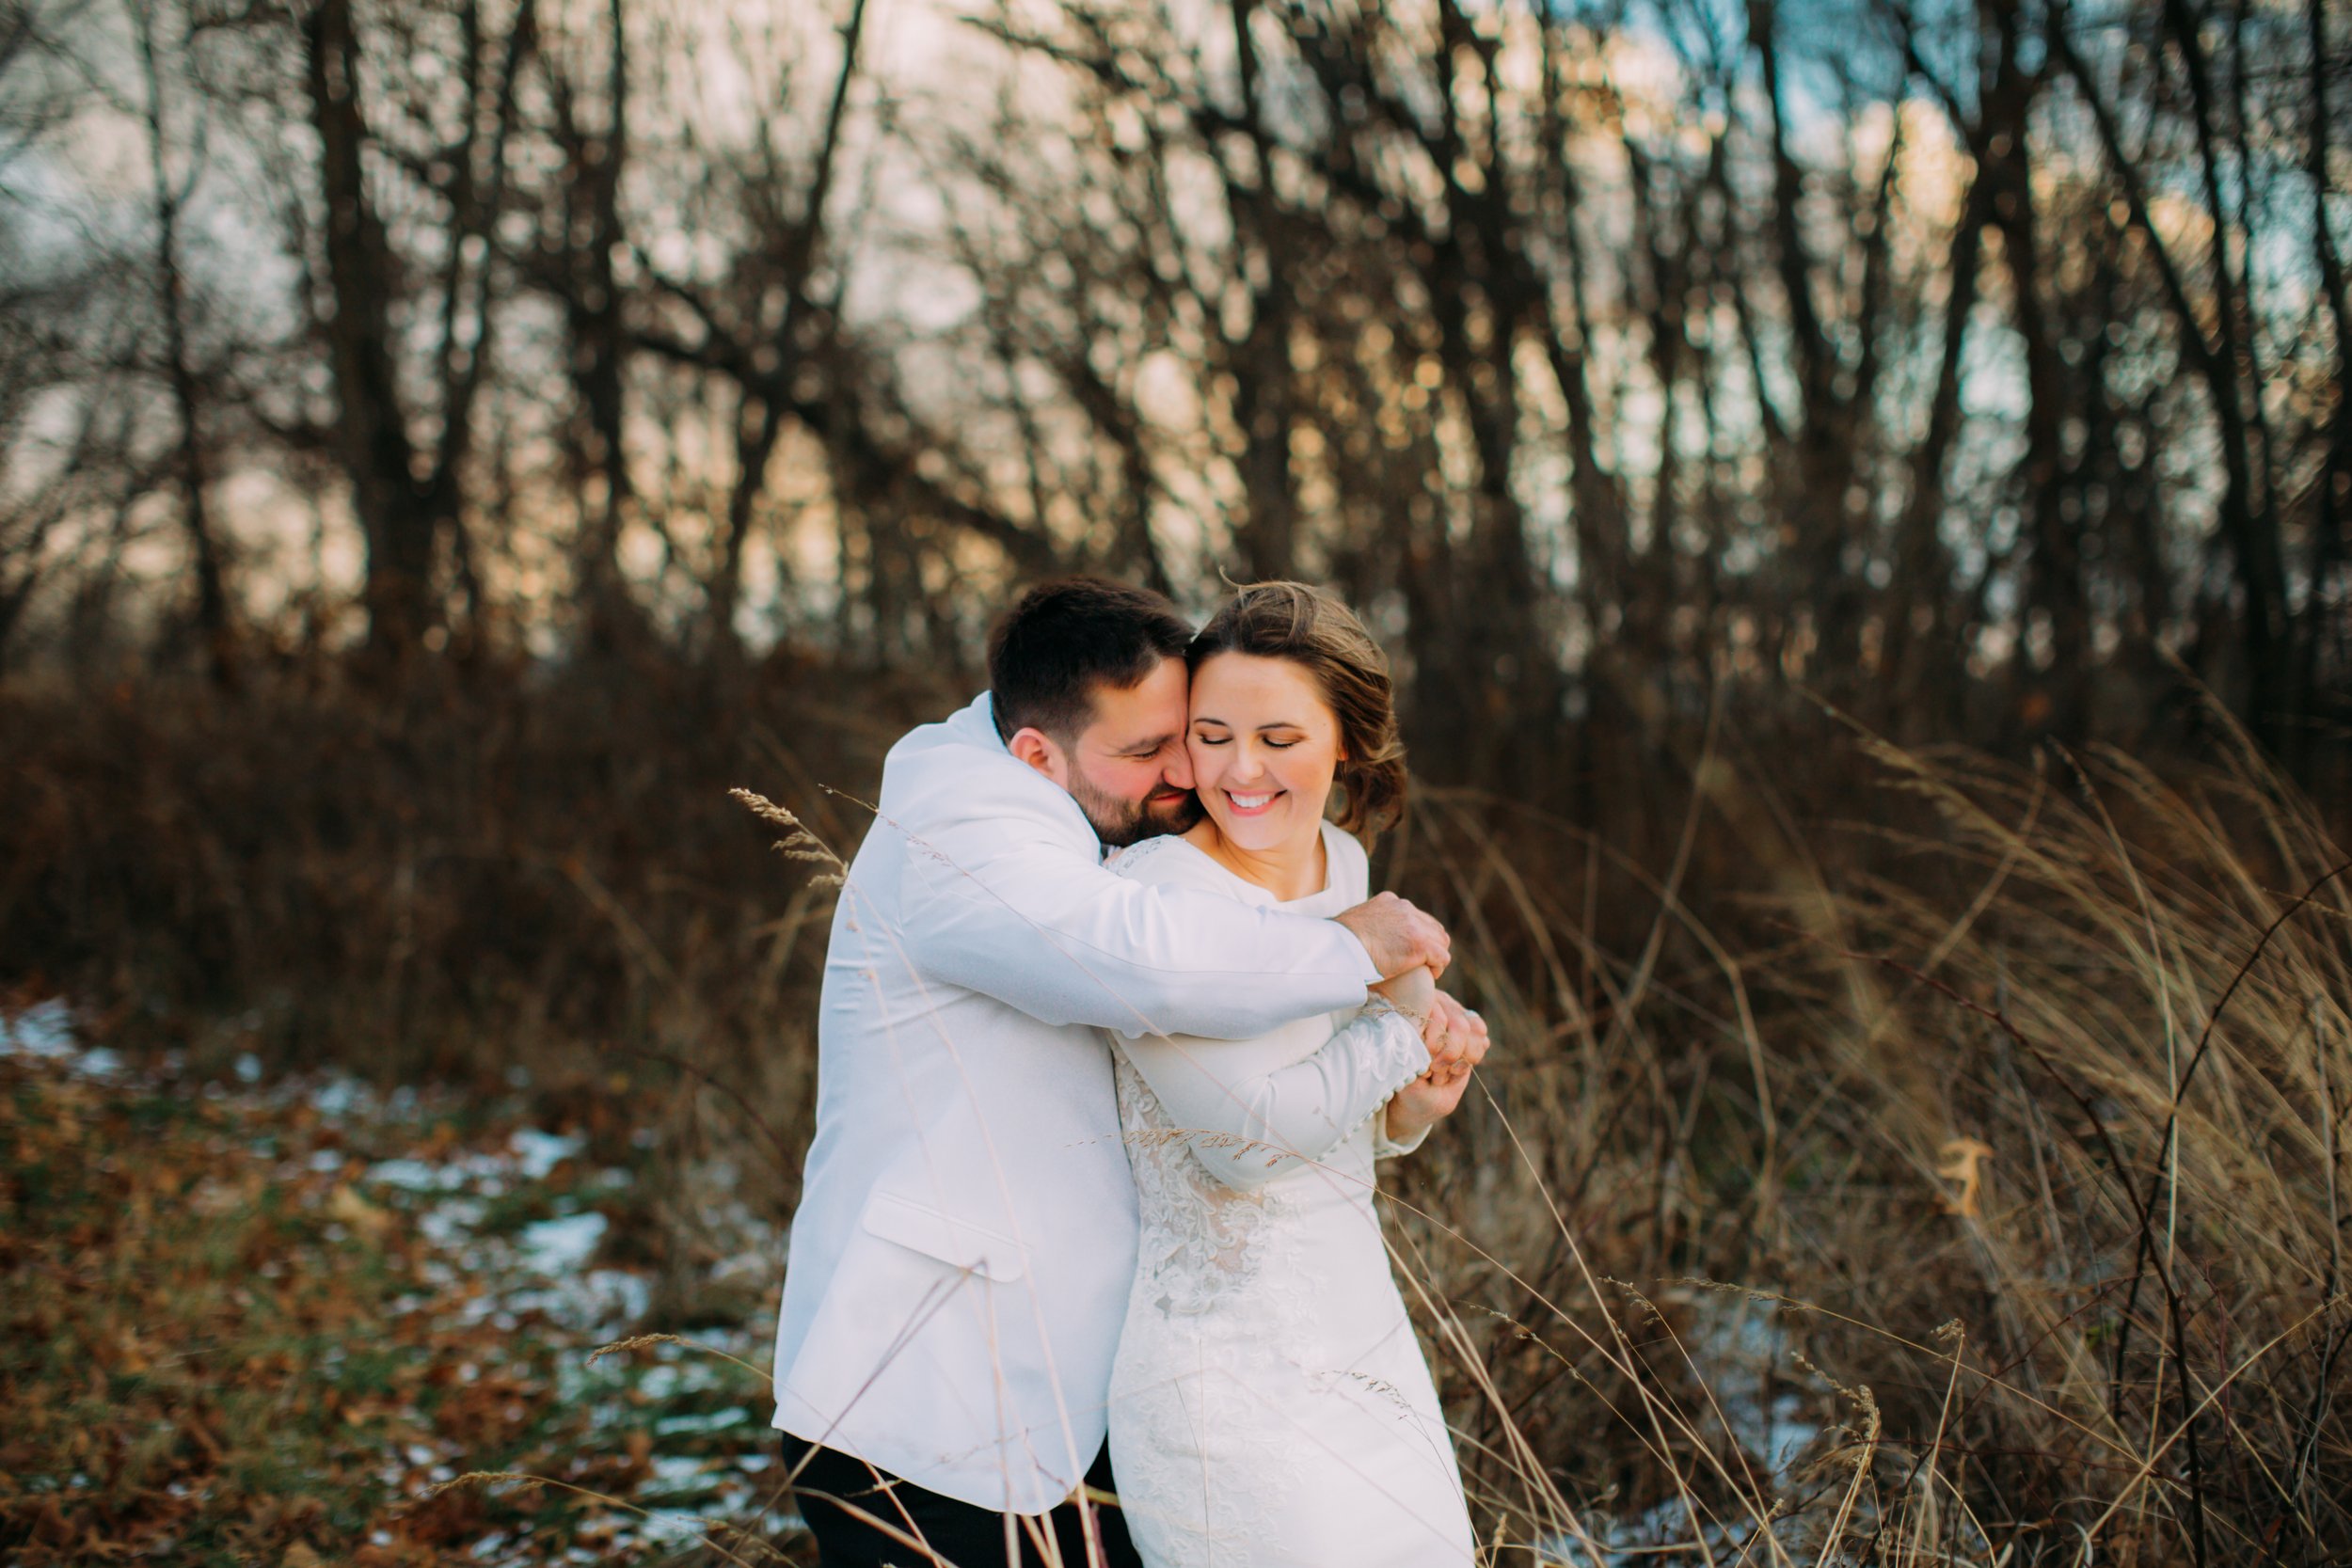  Teala Ward Photography captures a groom hugging his bride on their wedding day in LaSalle, IL in the cold weather. cold weather wedding #TealaWardPhotography #TealaWardWeddings #LaSalleWedding #churchwedding #Illinoisweddingphotographer #LaSalle,IL 